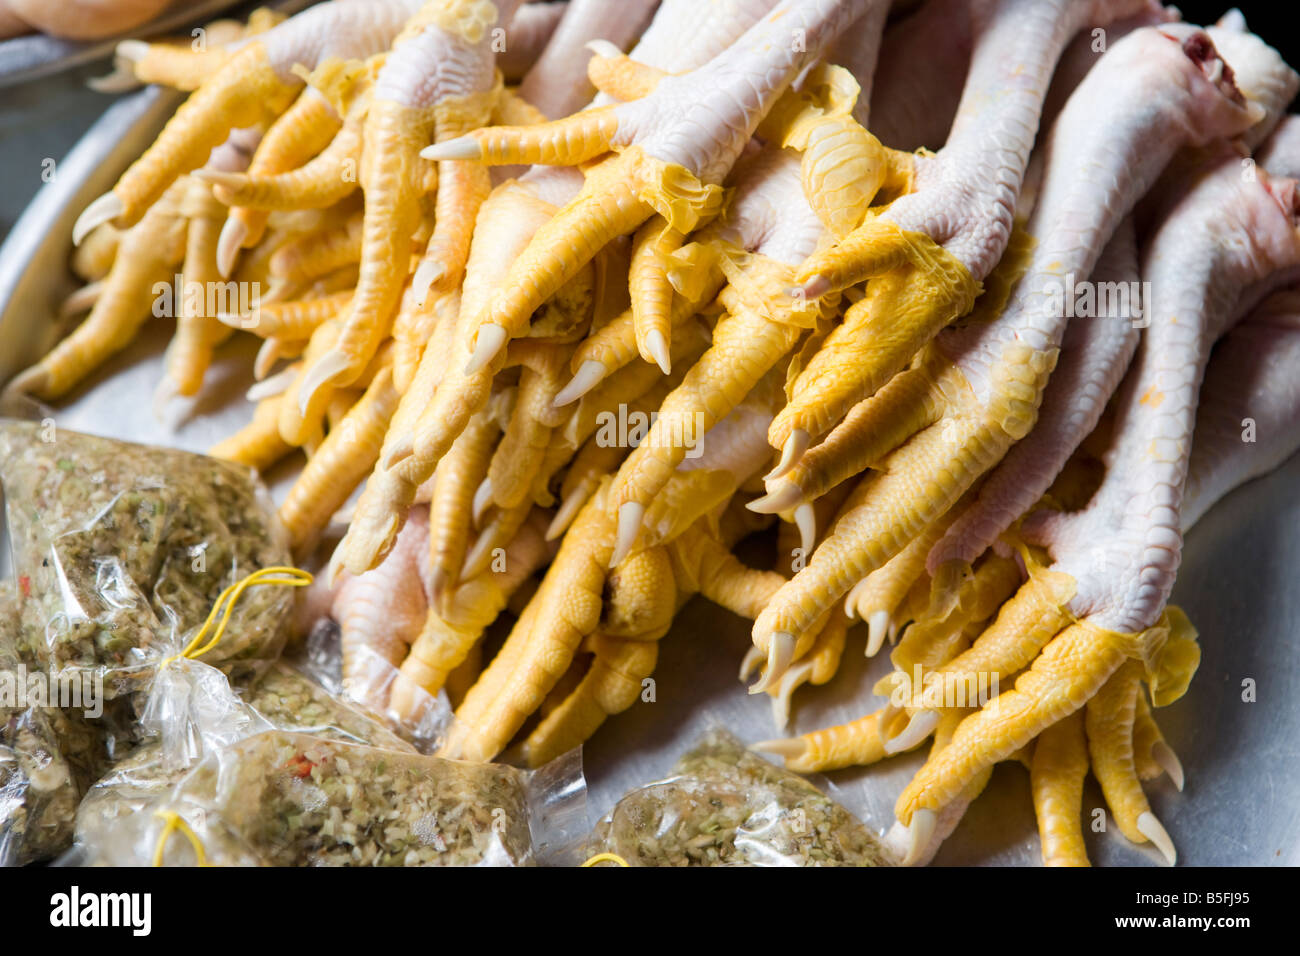 Chickens feet for sale in market in Vinh Long VIetnam Stock Photo